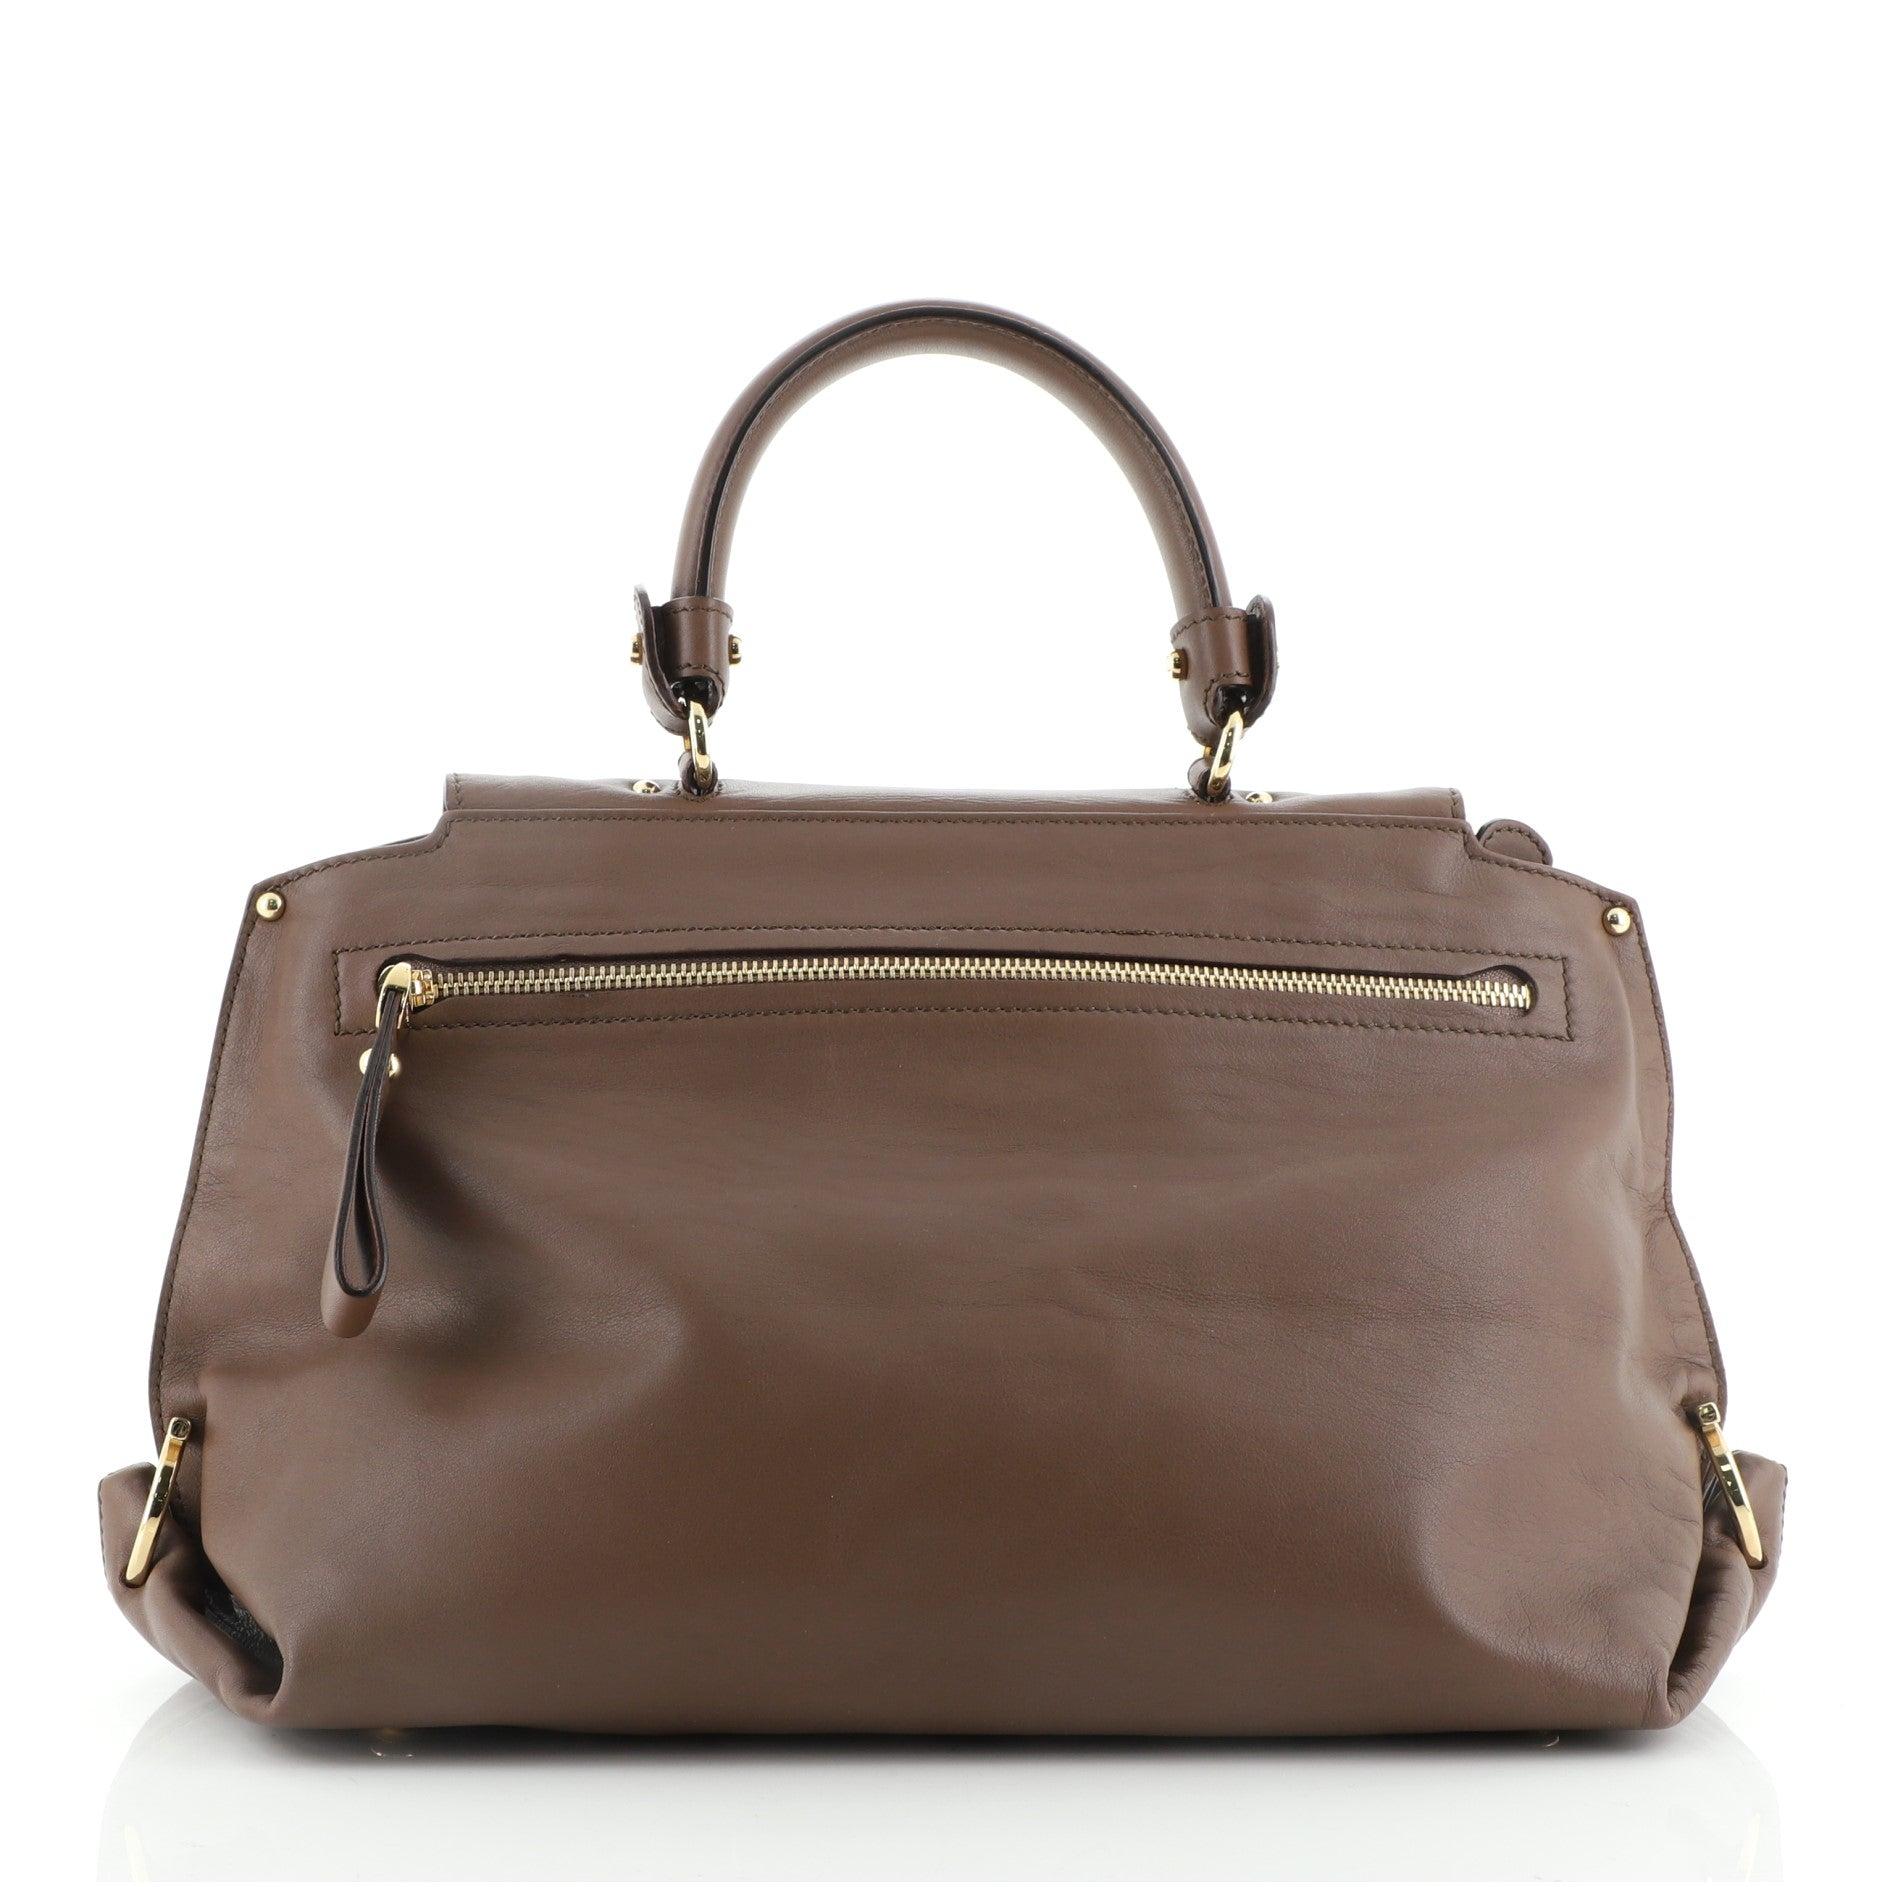 Salvatore Ferragamo Sofia Satchel Smooth Leather Medium
Brown Smooth Leather

Condition Details: Loss of shape, light scuffs and wear on exterior, minor scuffs on strap, creasing on strap. Splitting on handle base wax edges, cracking on flap and